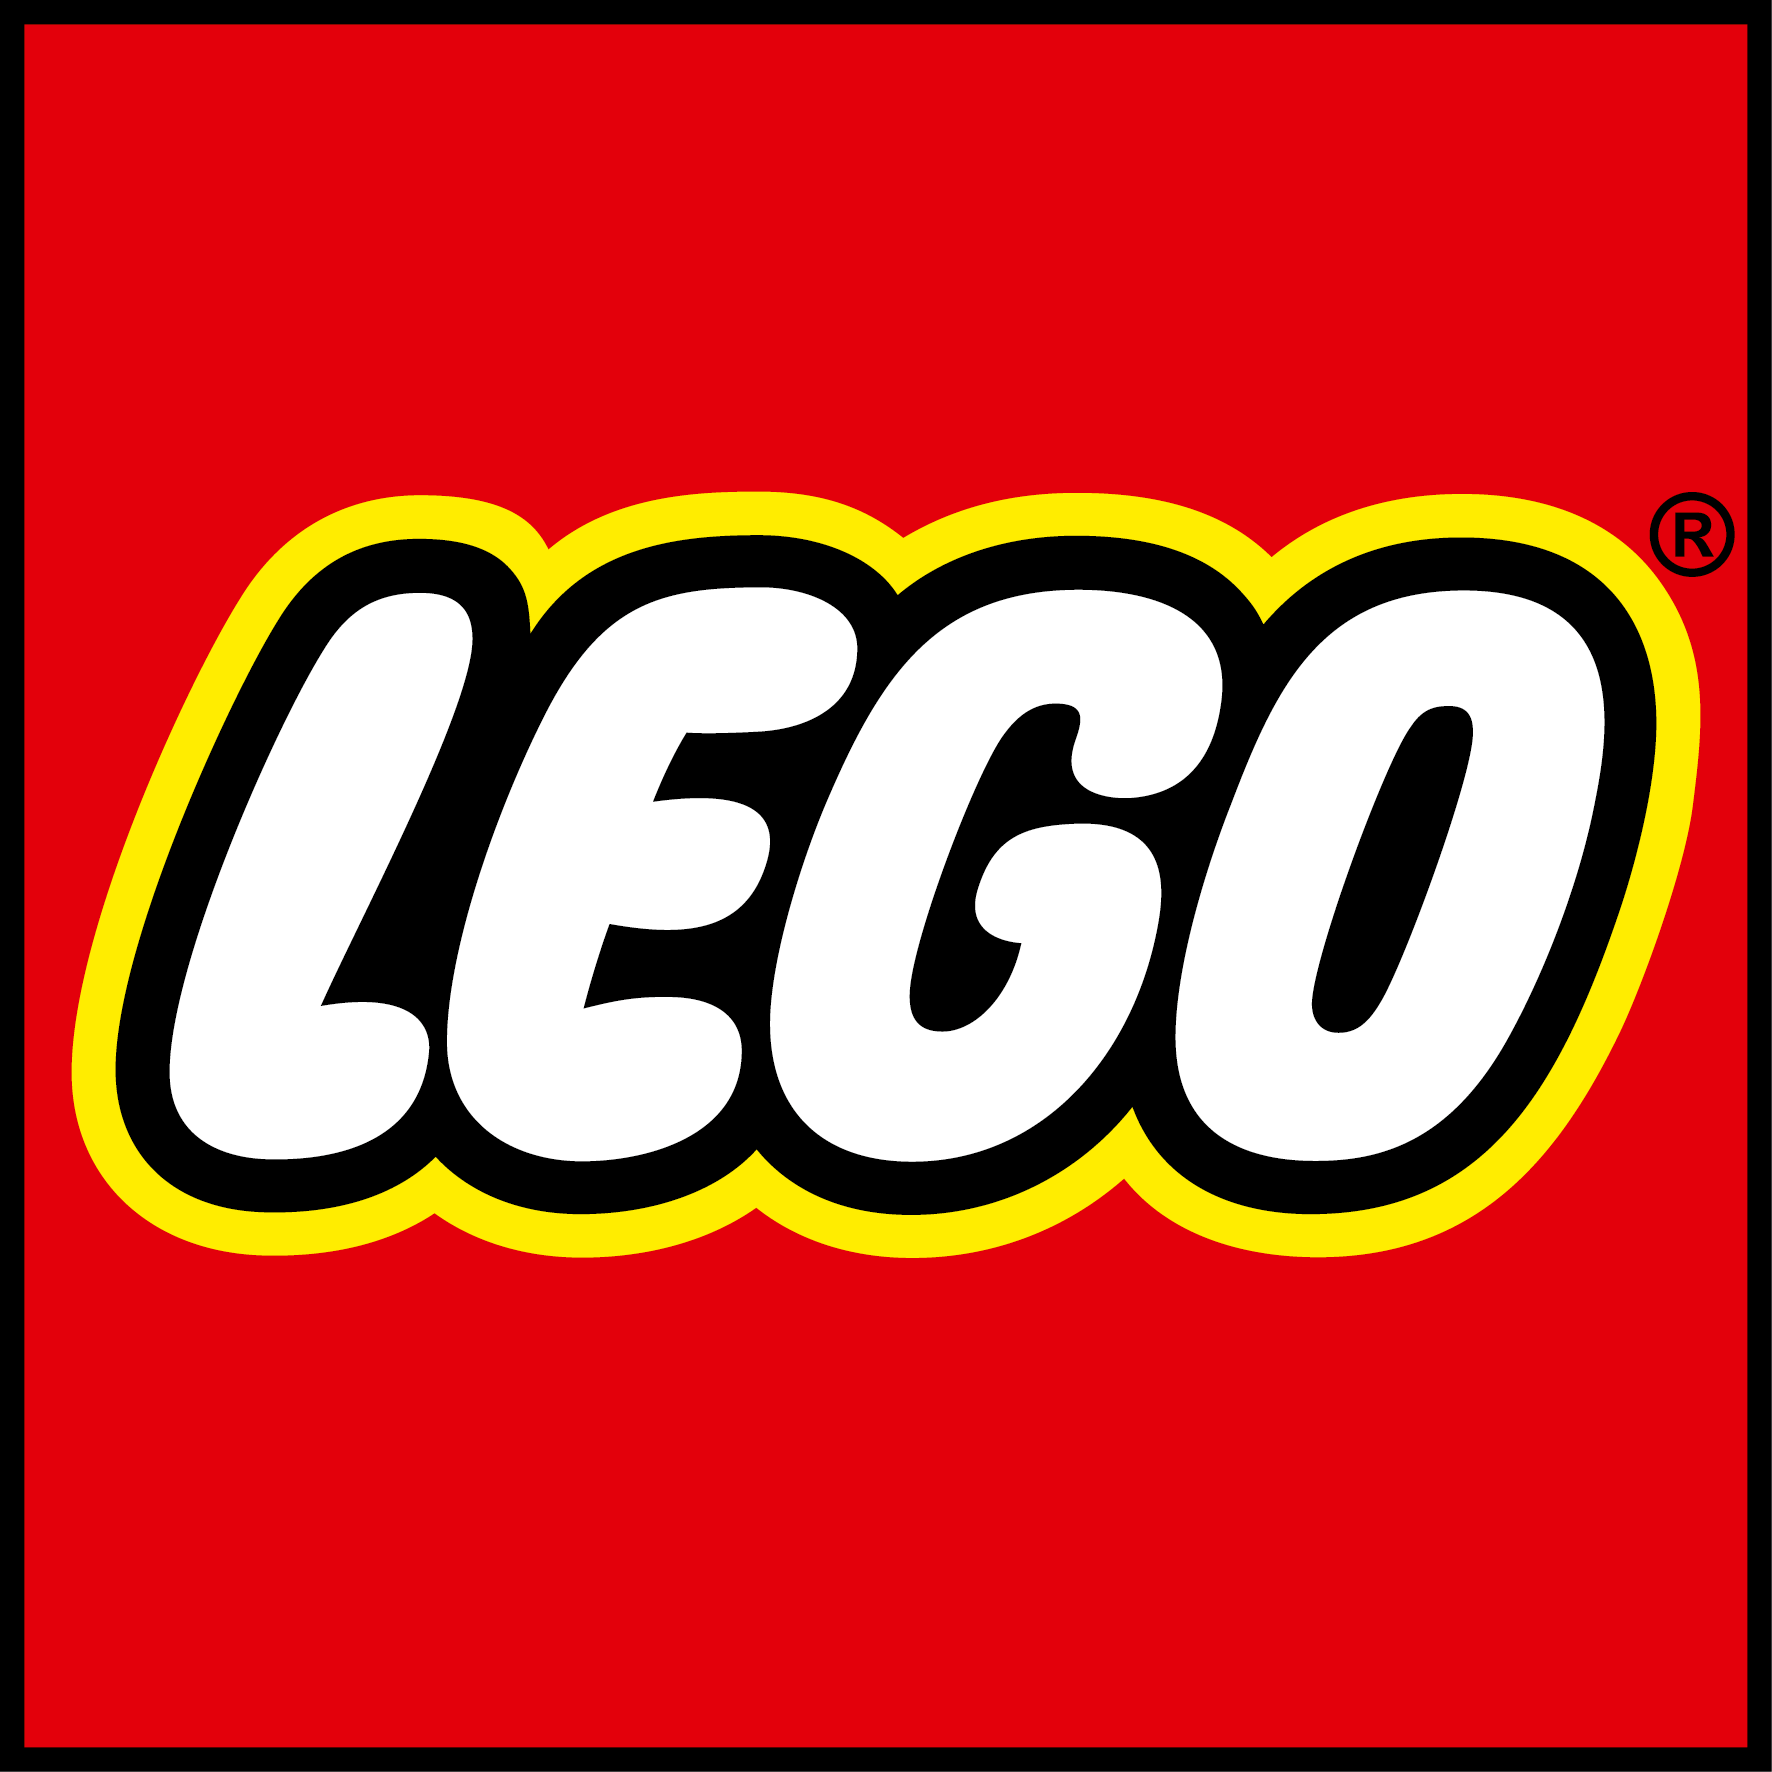 LEGO Official Store